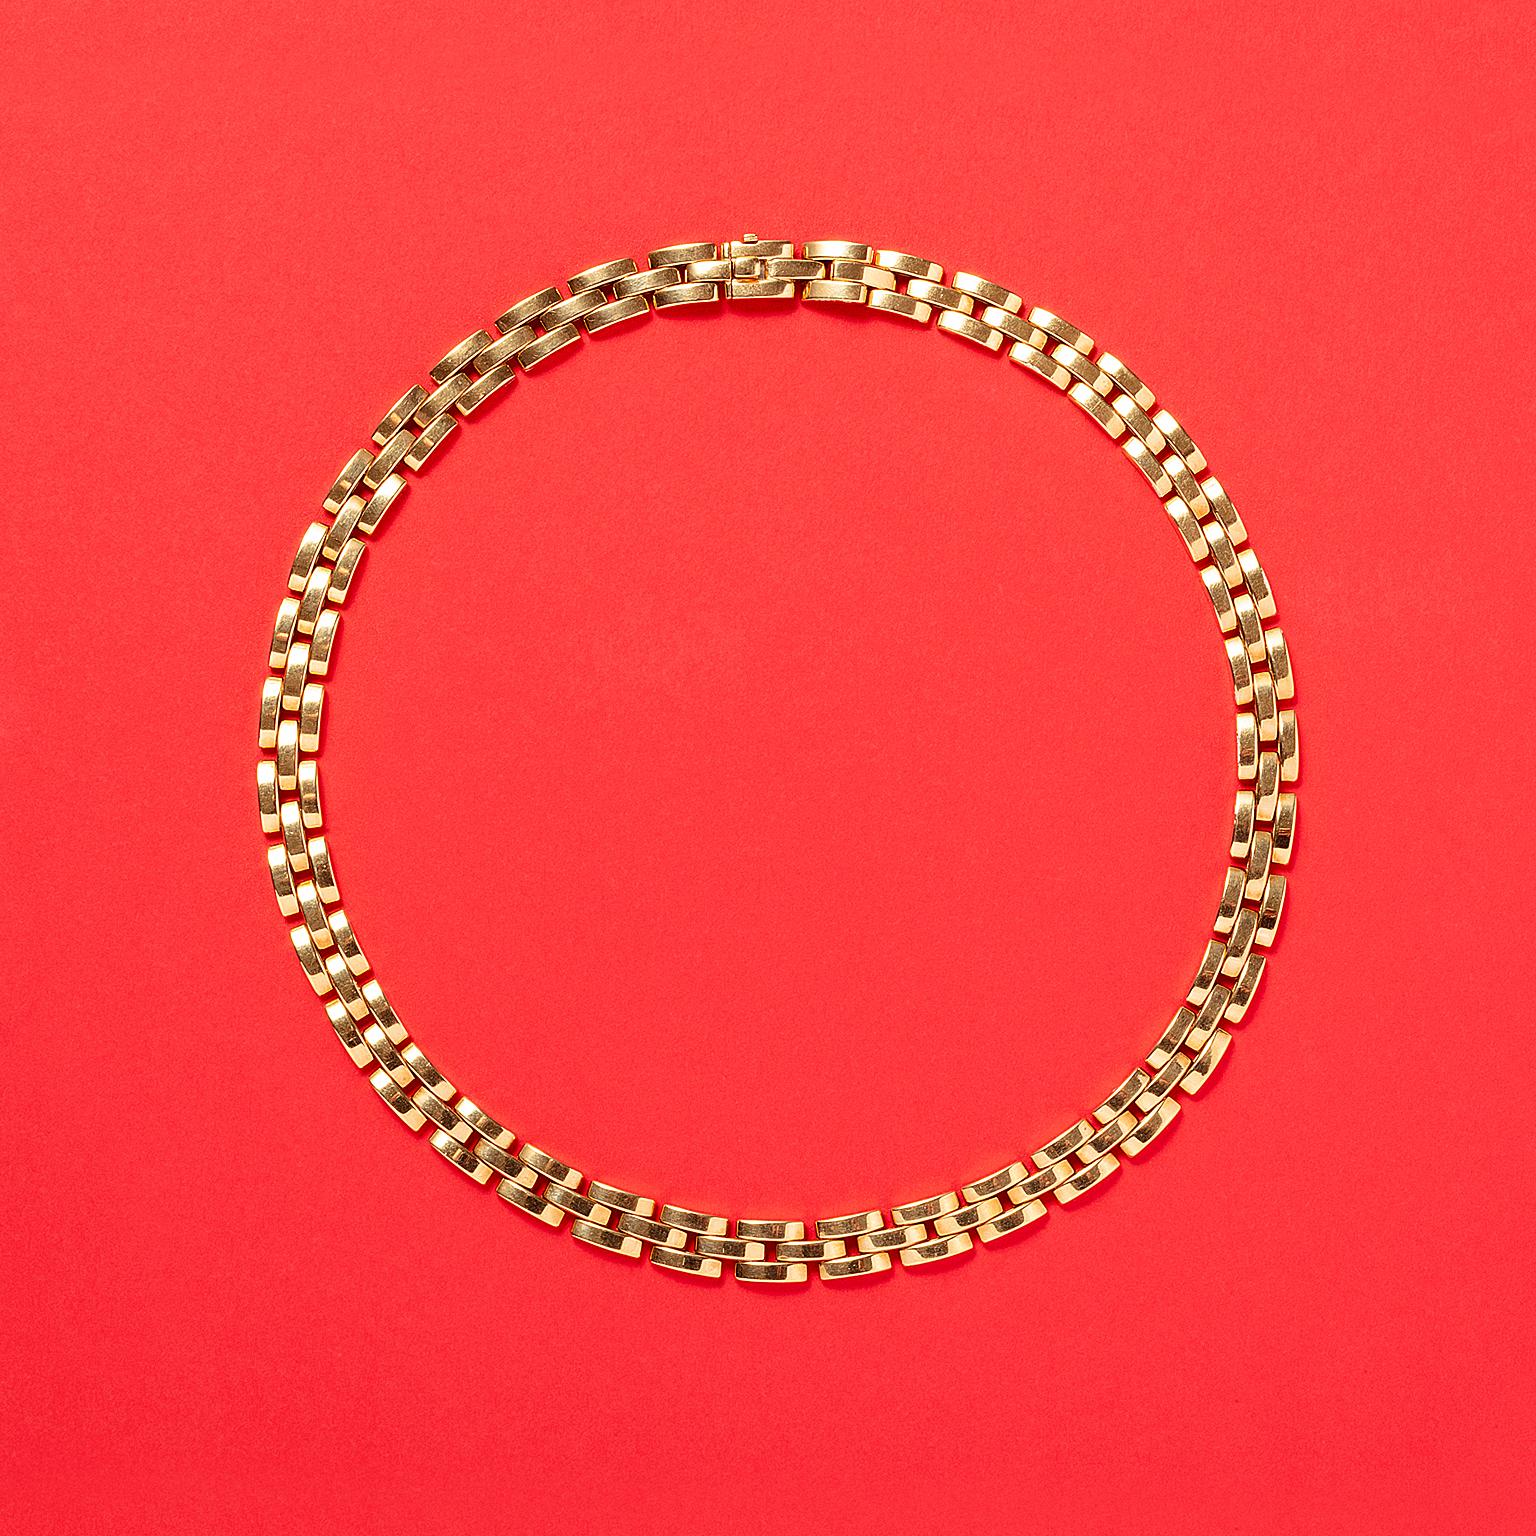 An 18 carat yellow gold necklace, signed and numbered: Cartier, 660773, model: maillon Panthère.

weight: 77.3 g
length: 42 cm
width: 8 mm